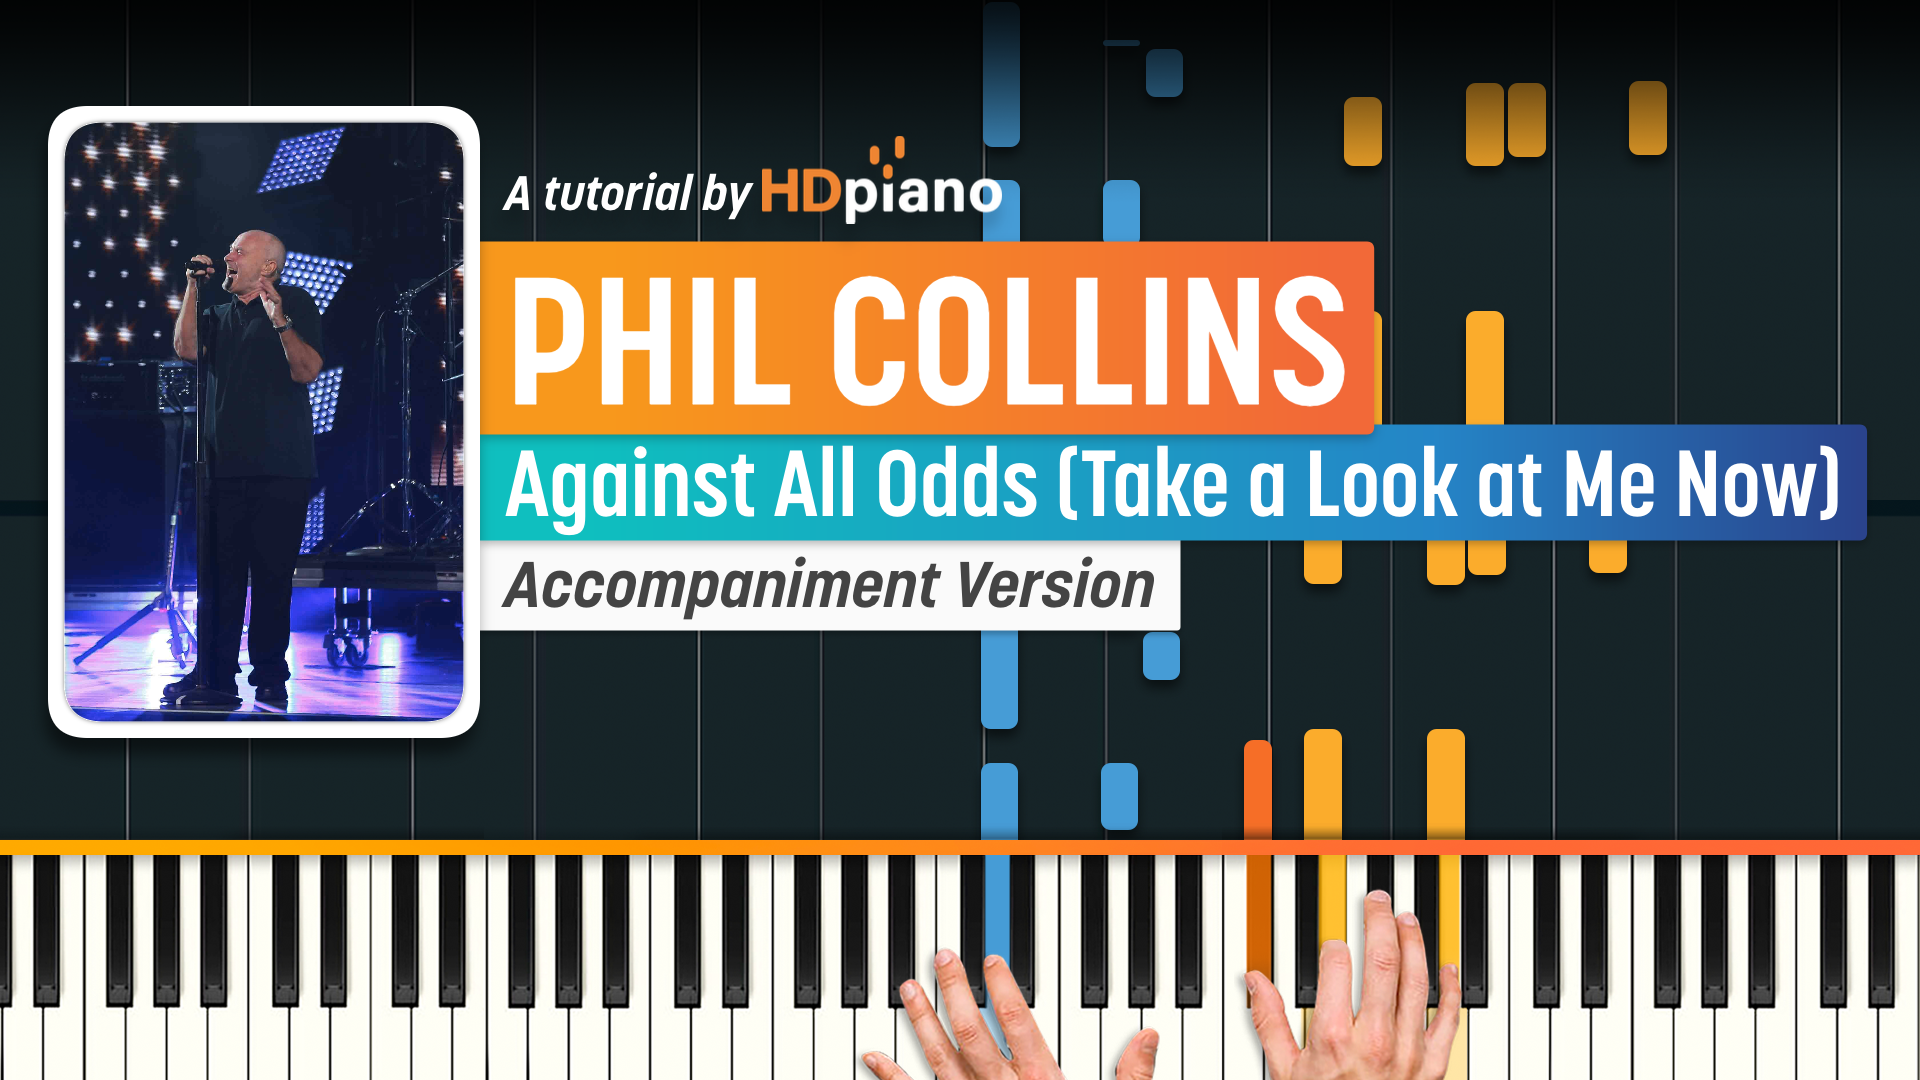 Phil Collins - Against All Odds (Take look at me now) Tradução